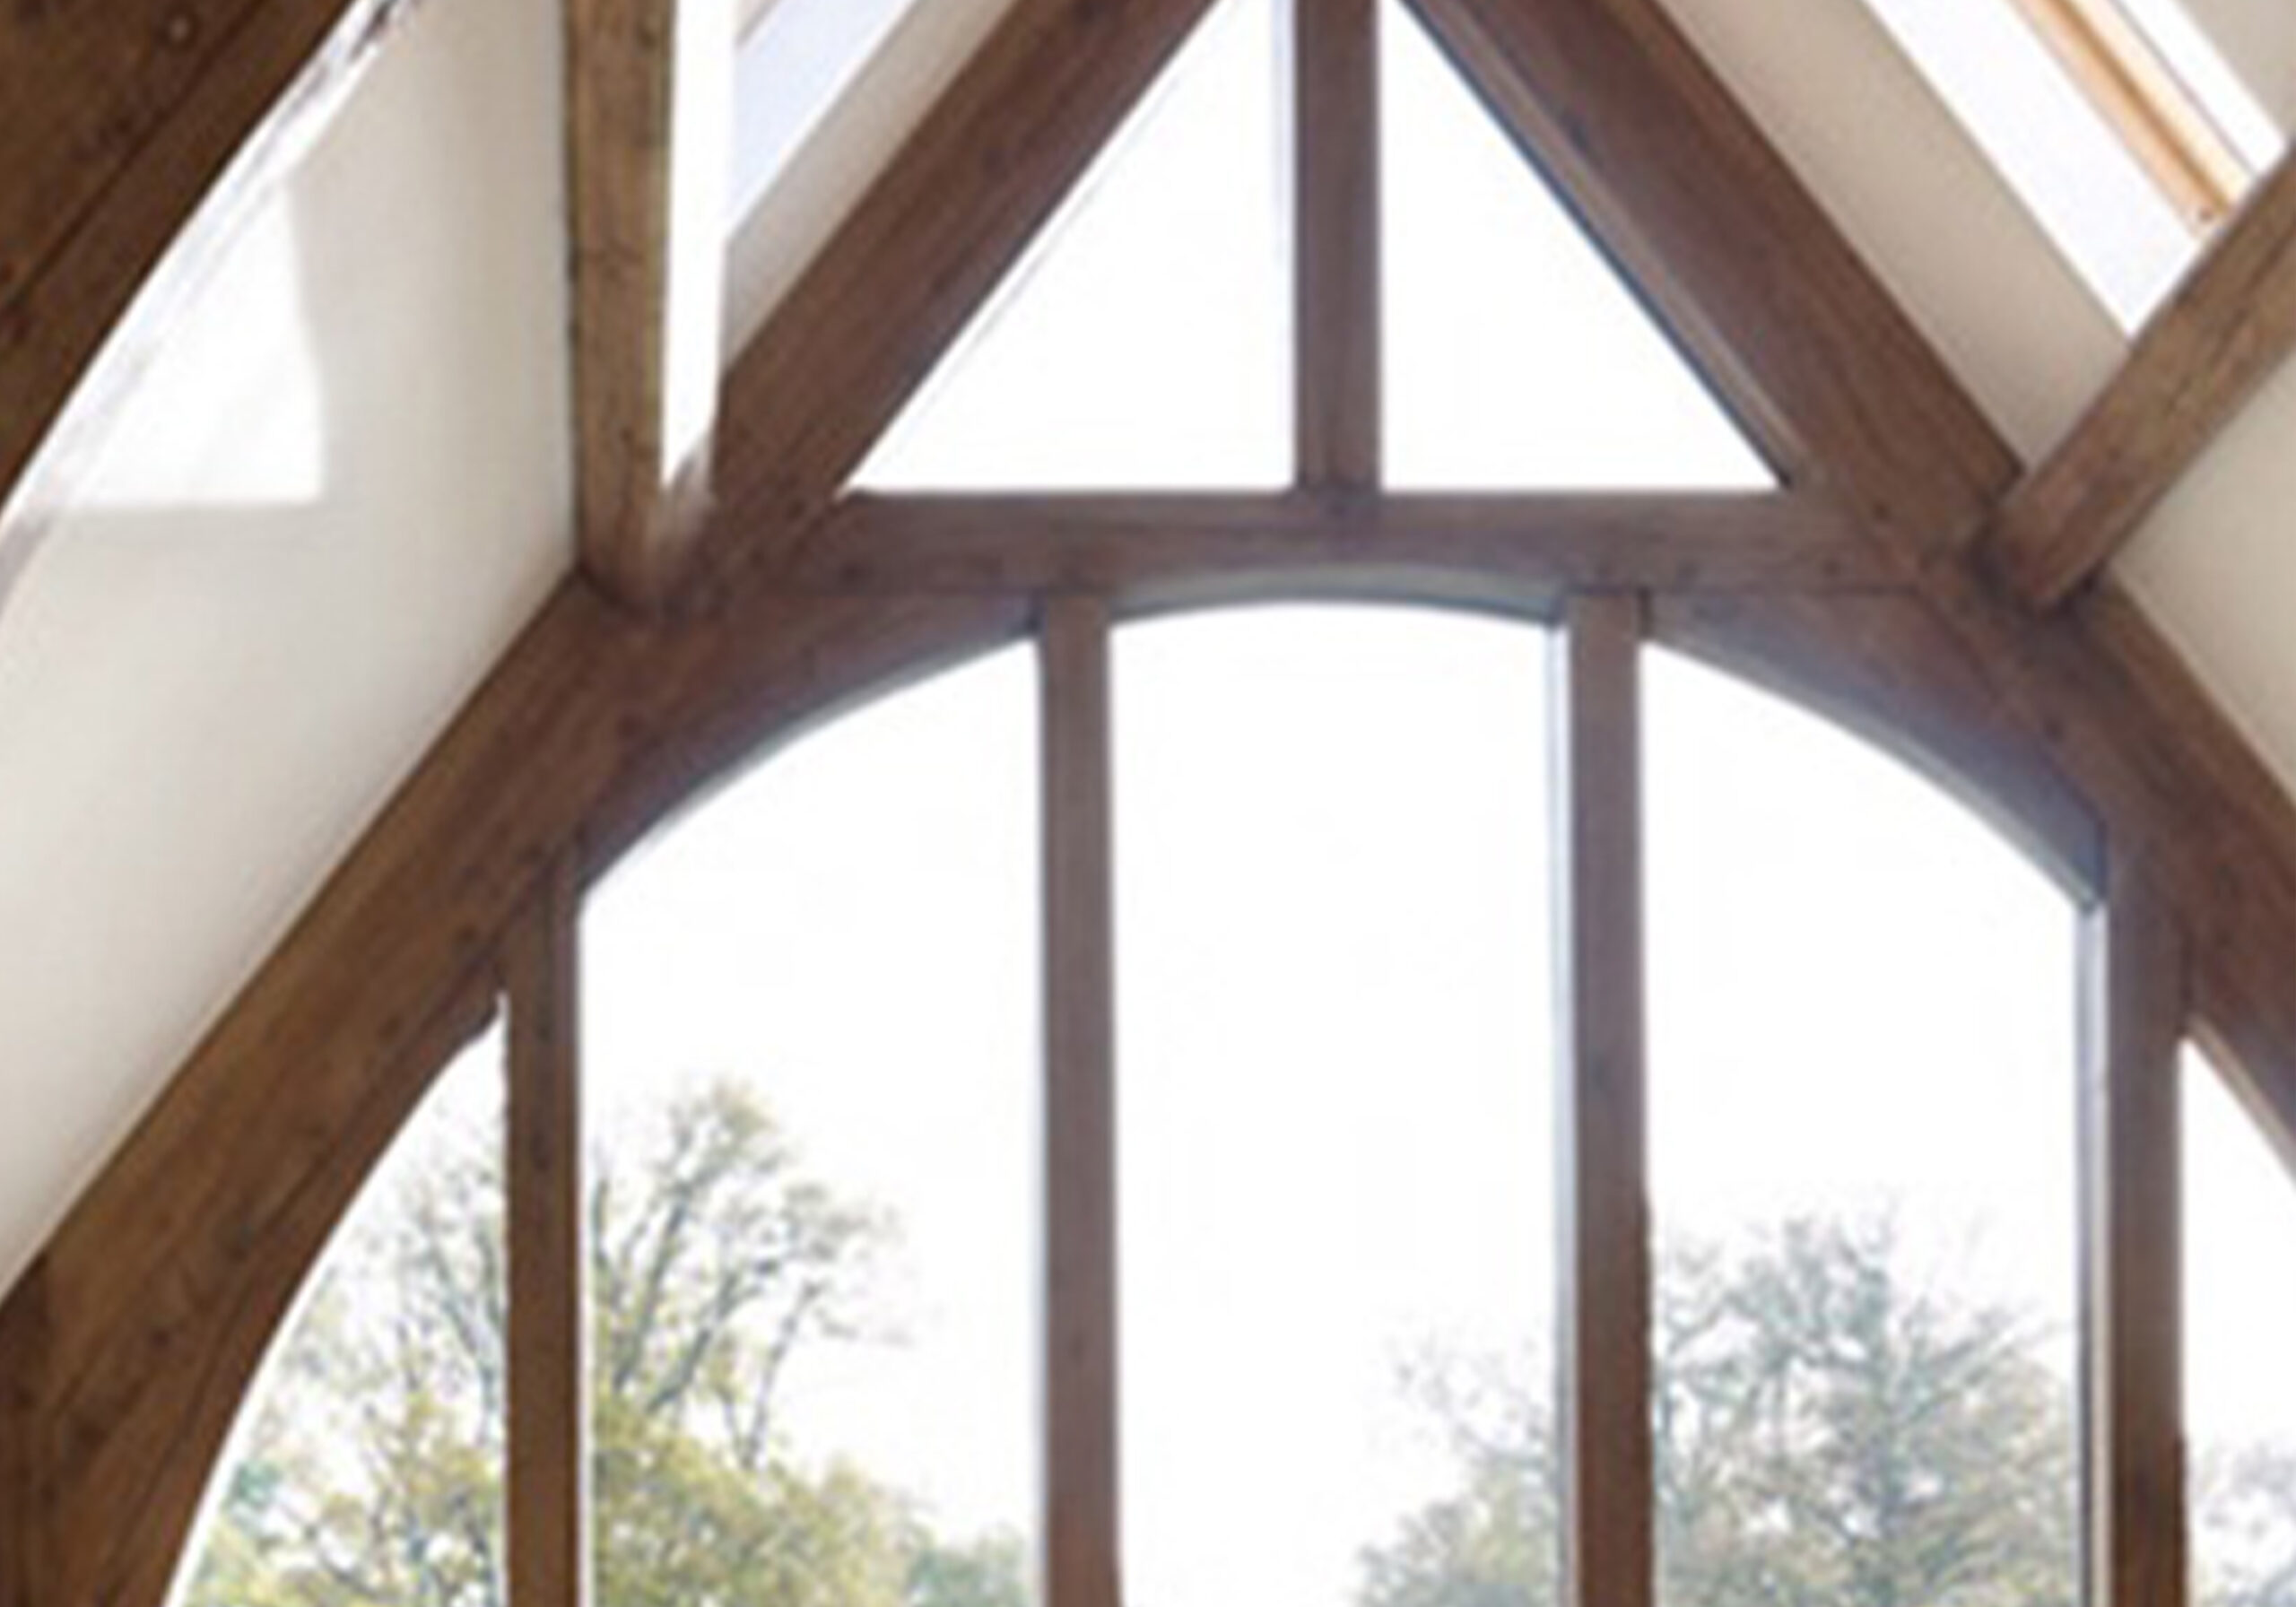 local joinery expertise in barn conversion joinery